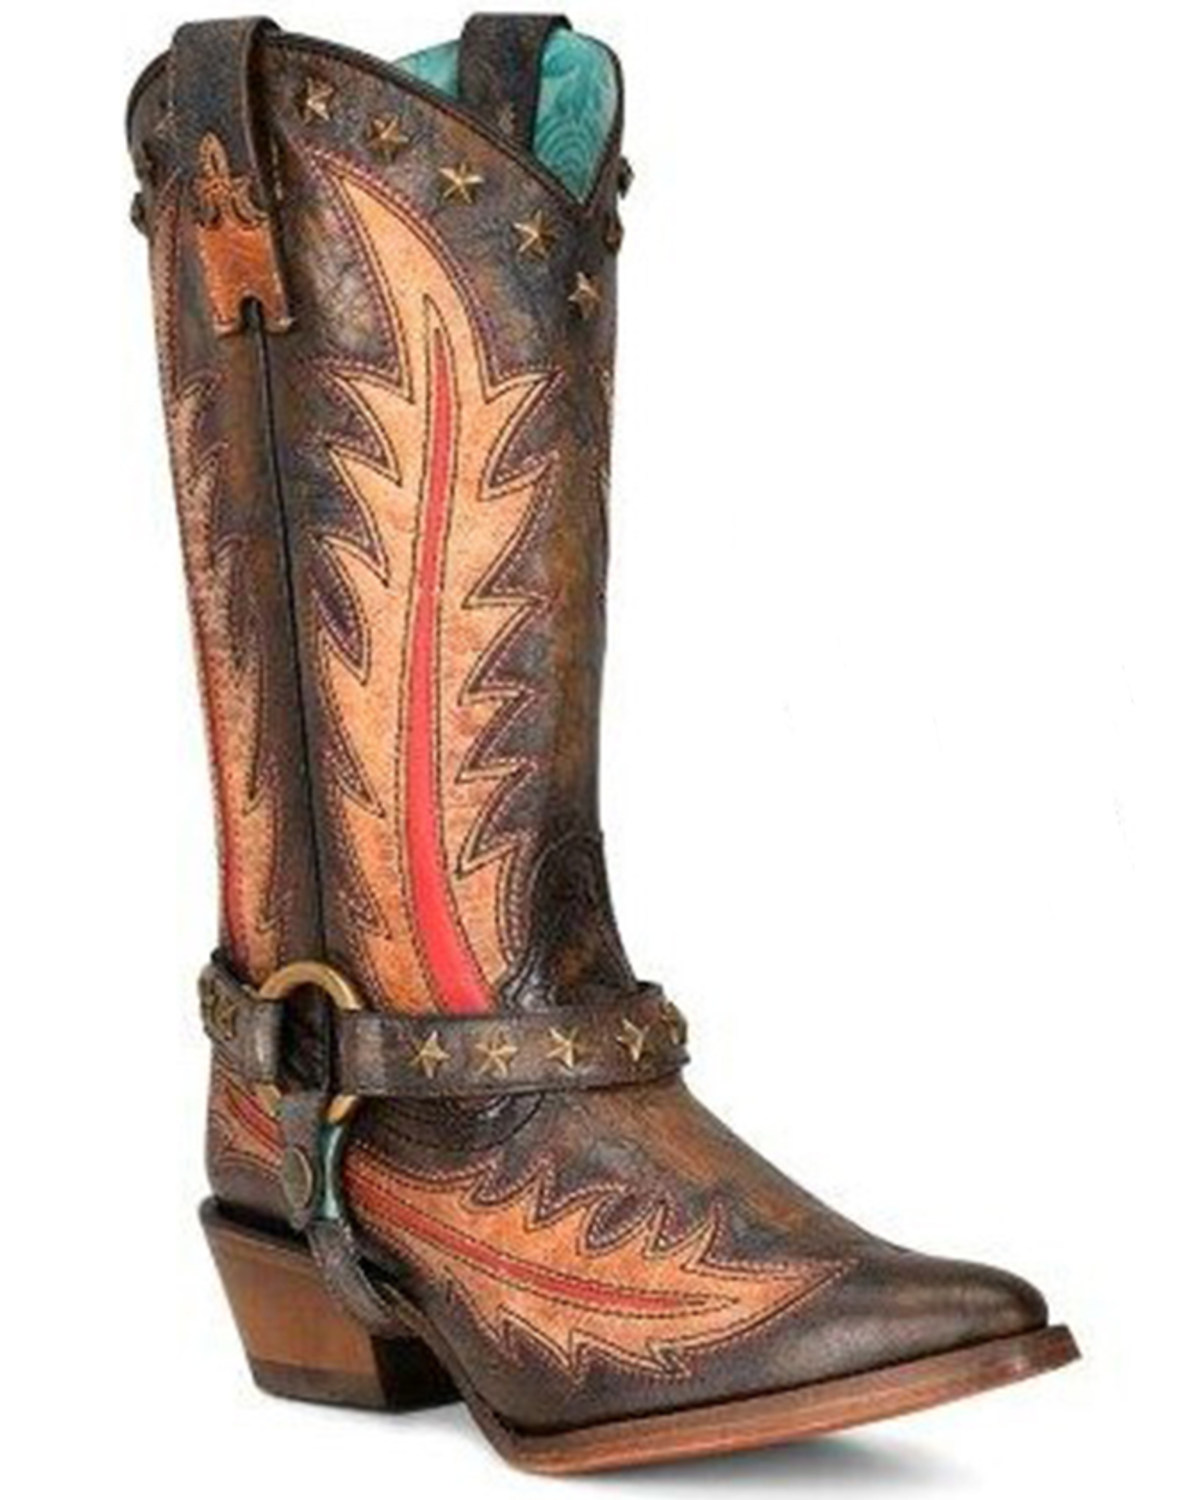 Corral Women's Star Studded and Harness Western Boot - Pointed Toe